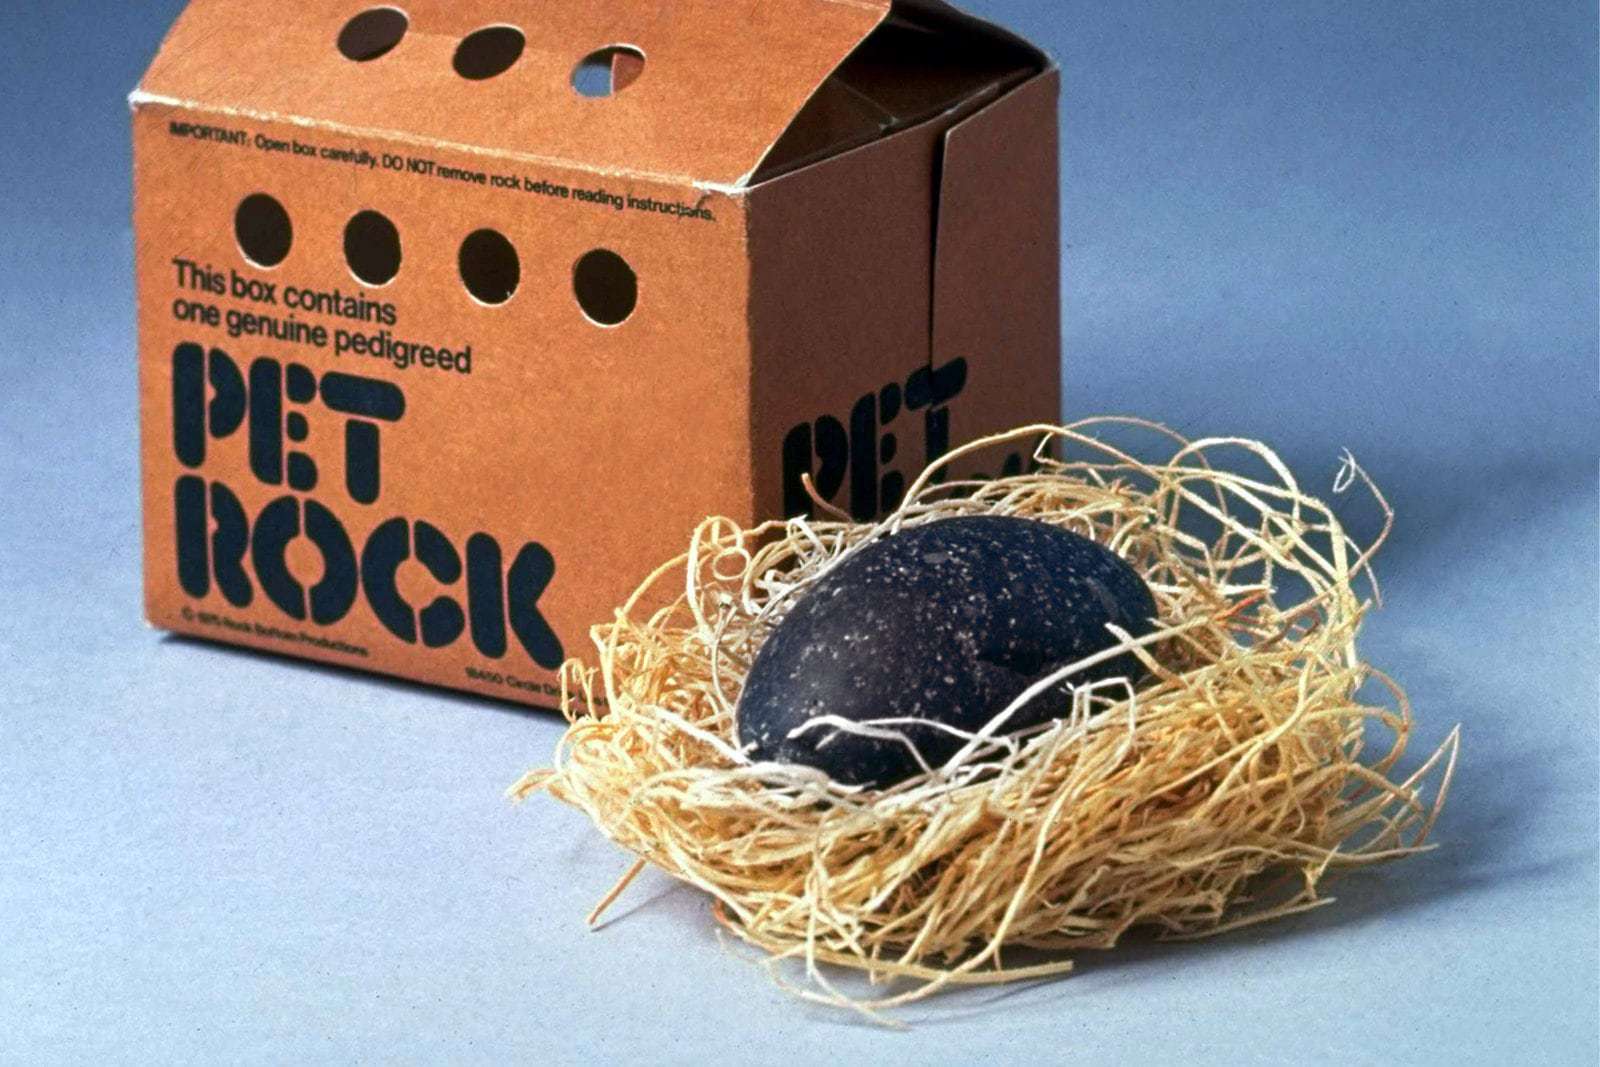 The-history-of-the-Pet-Rock-novelty-toy-gag-gift.jpg